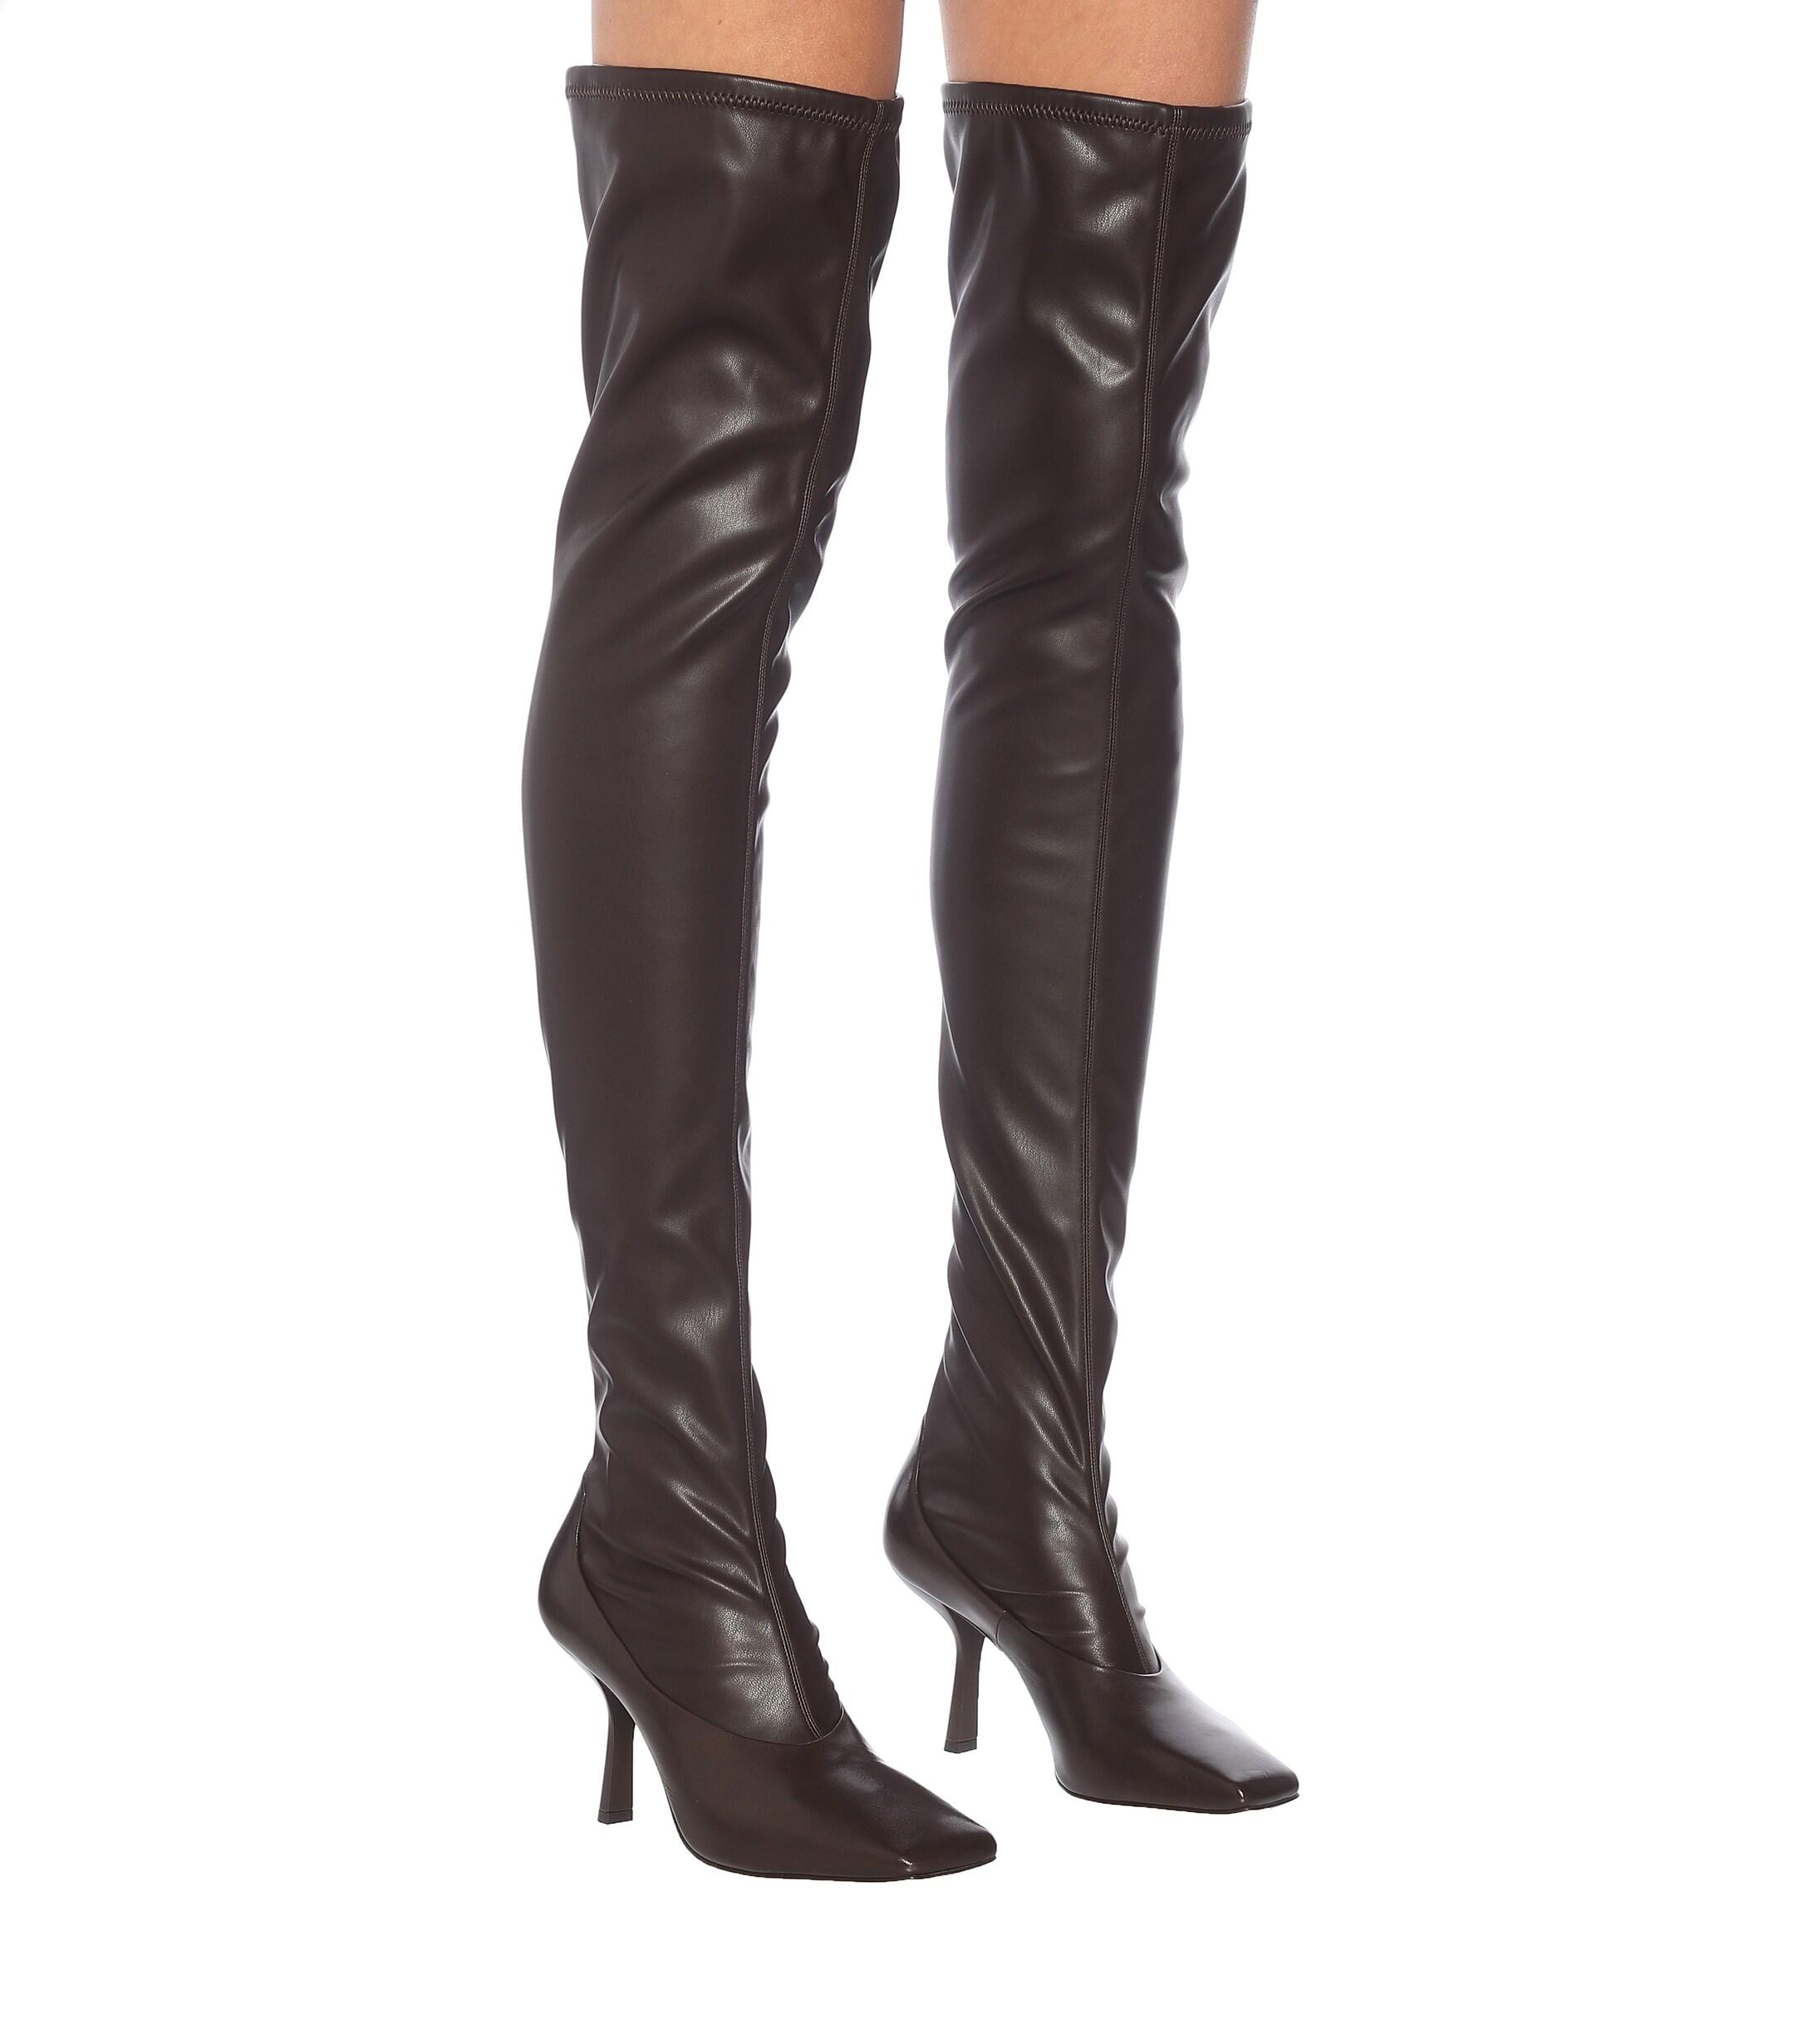 Jimmy Choo Mire 85 Over-the-knee Boots in Brown - Lyst